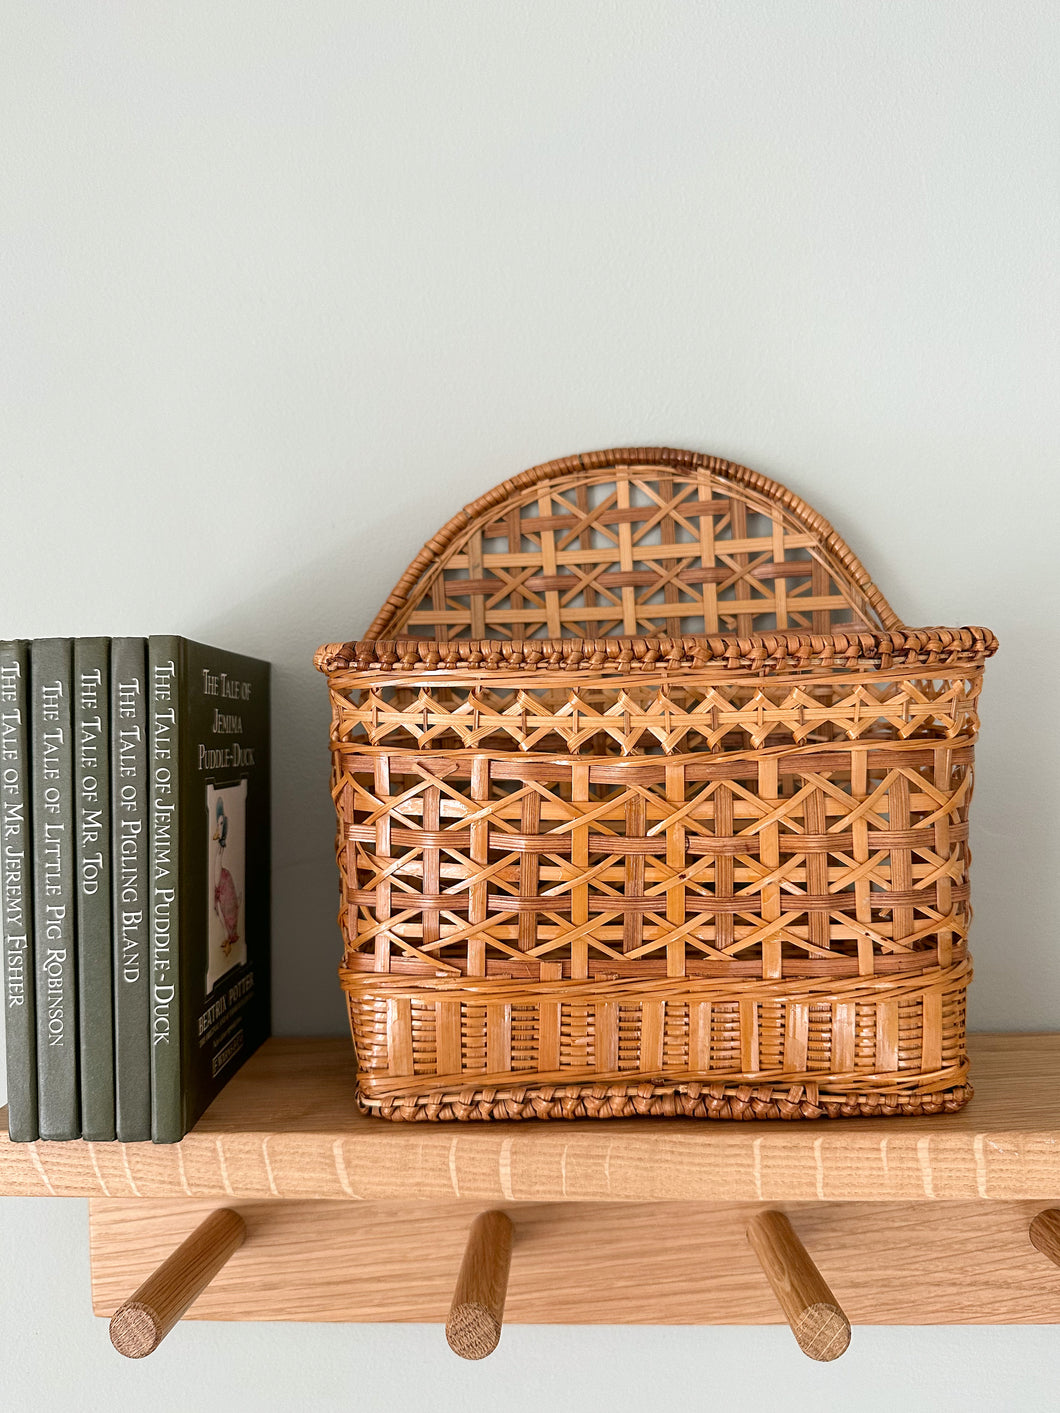 Vintage wicker/rattan letter rack/basket or desk tidy, wall mounted or free standing - Moppet